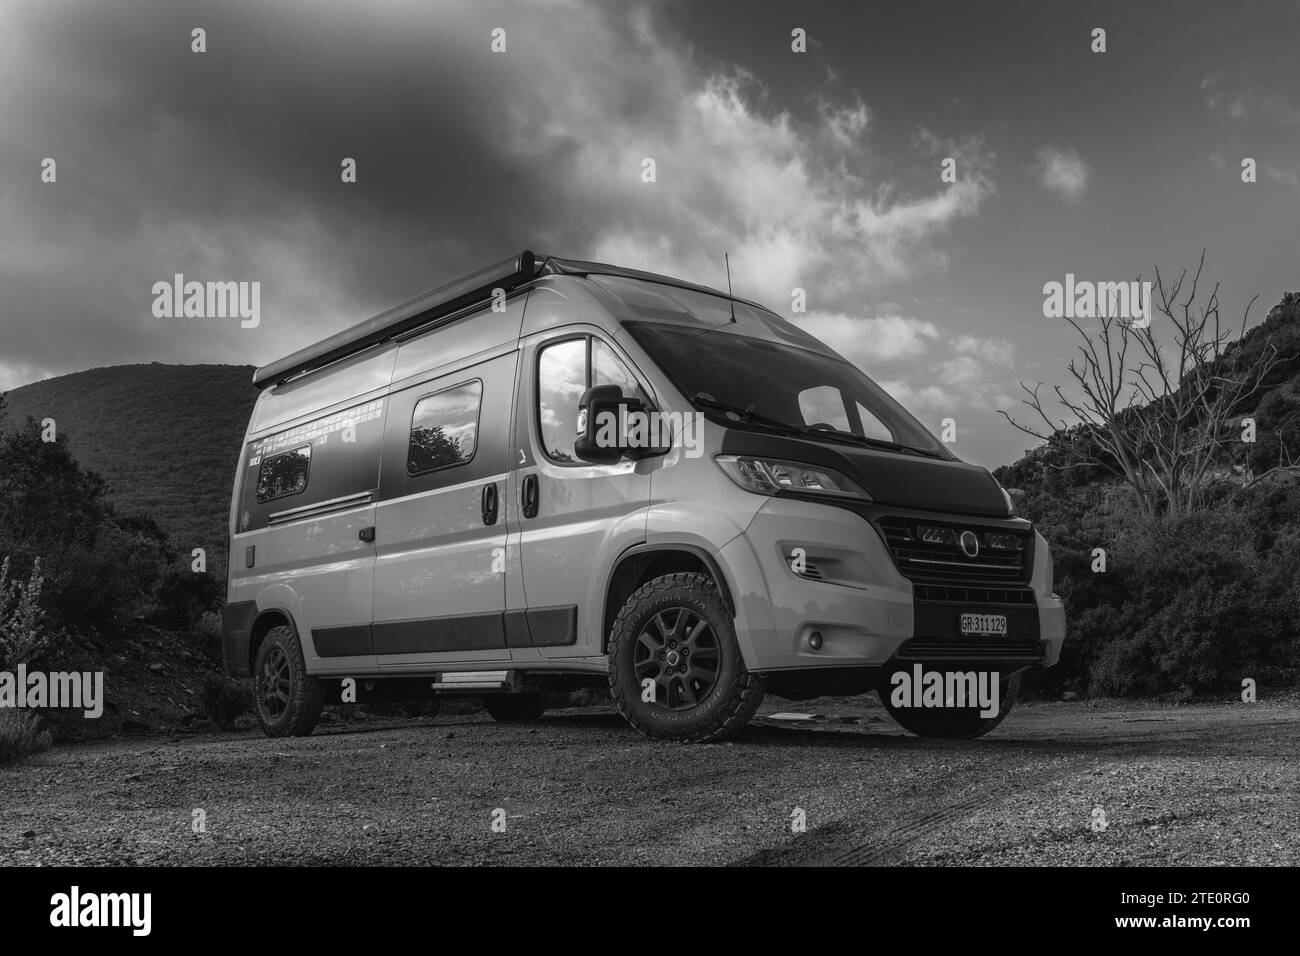 A black and white low angle view of a campervan parked on a dirt road Stock Photo